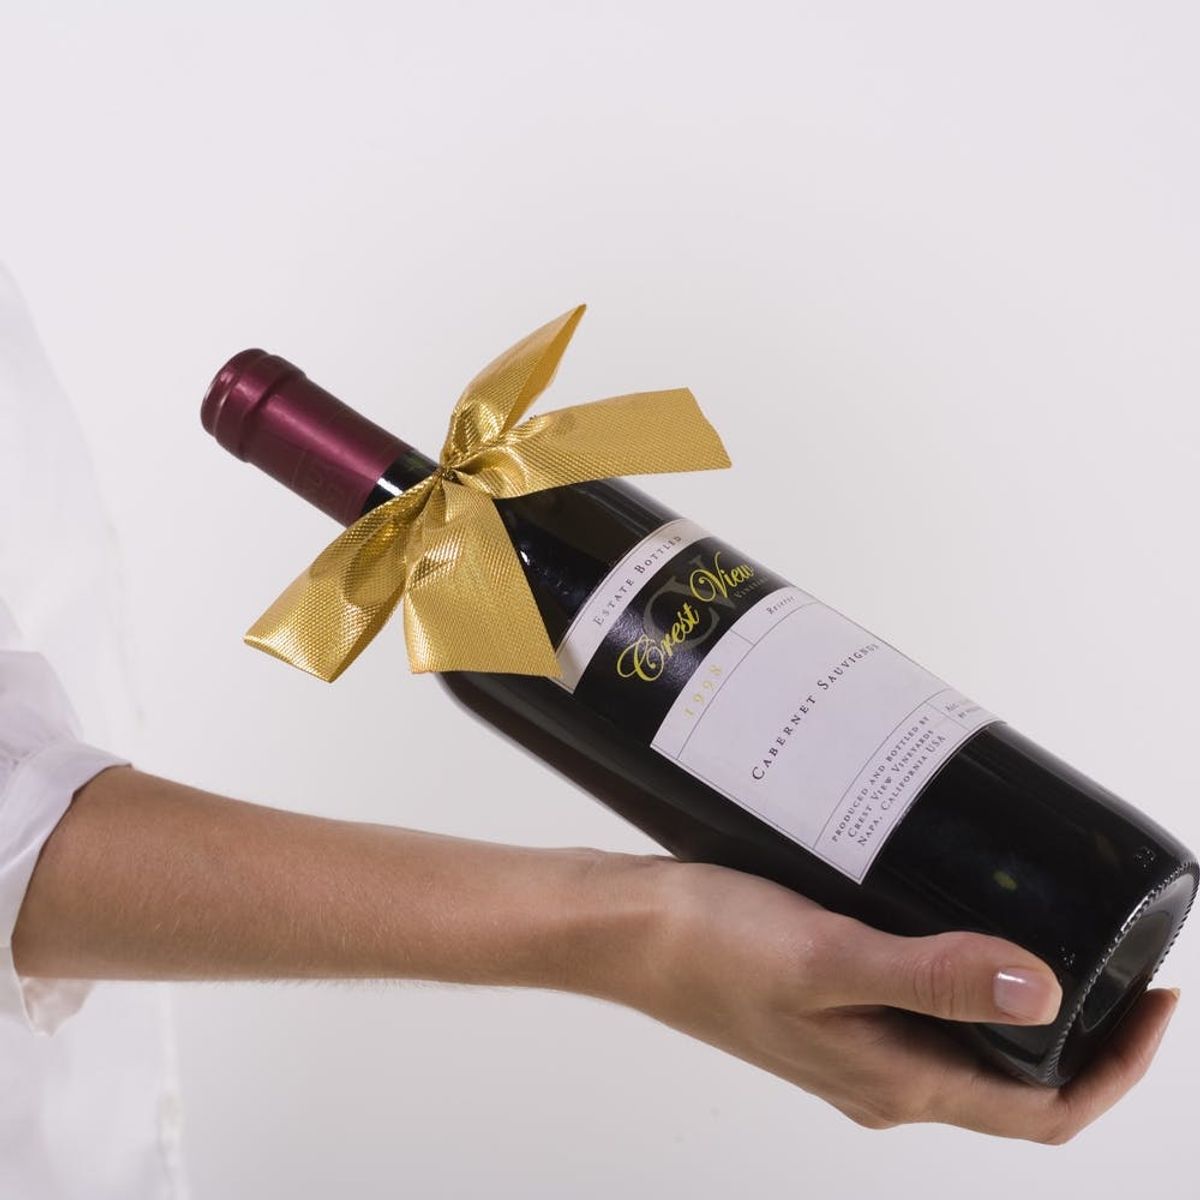 5 Reasons You Should Stop Giving Alcohol As a Holiday Gift